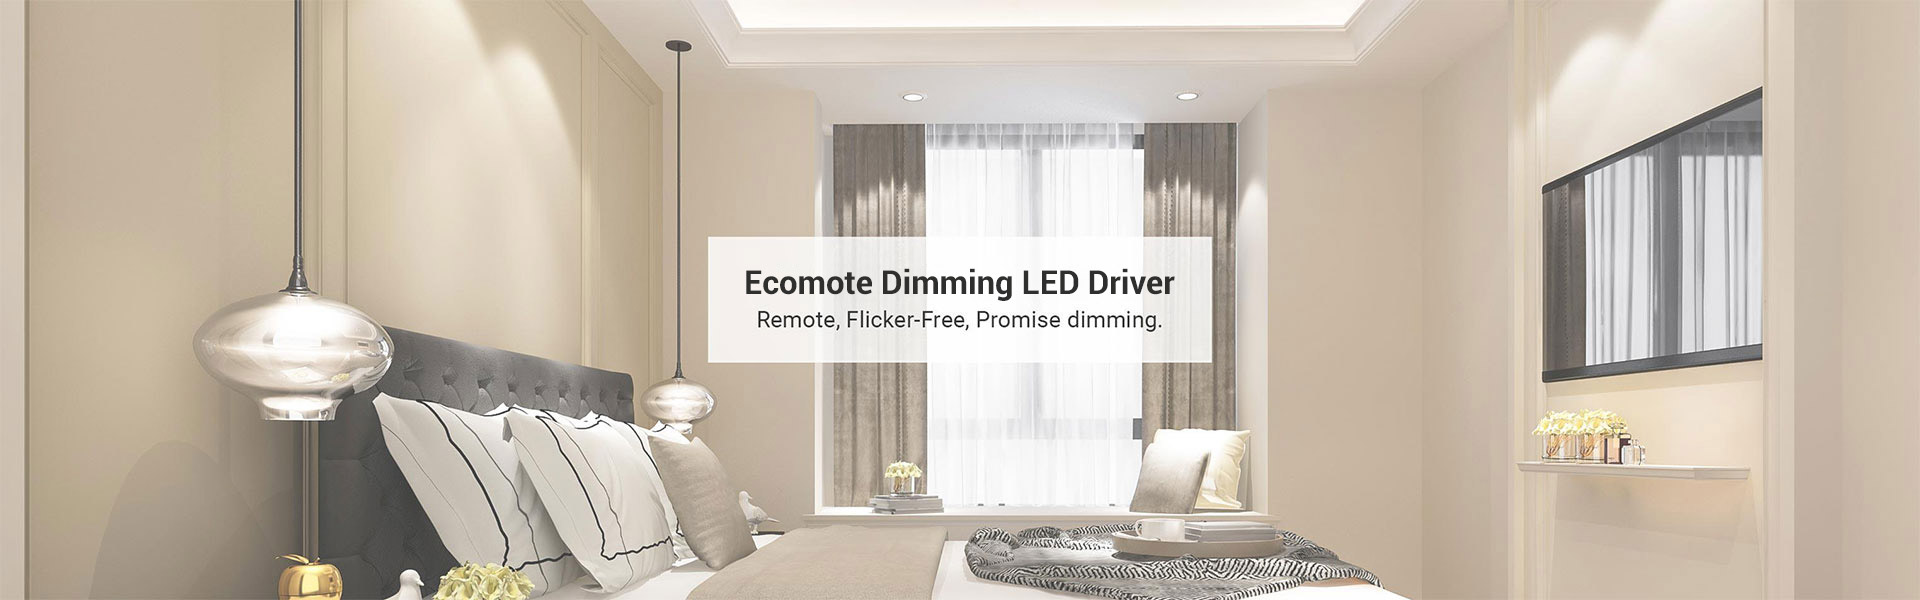 Ecomote Dimming LED Driver